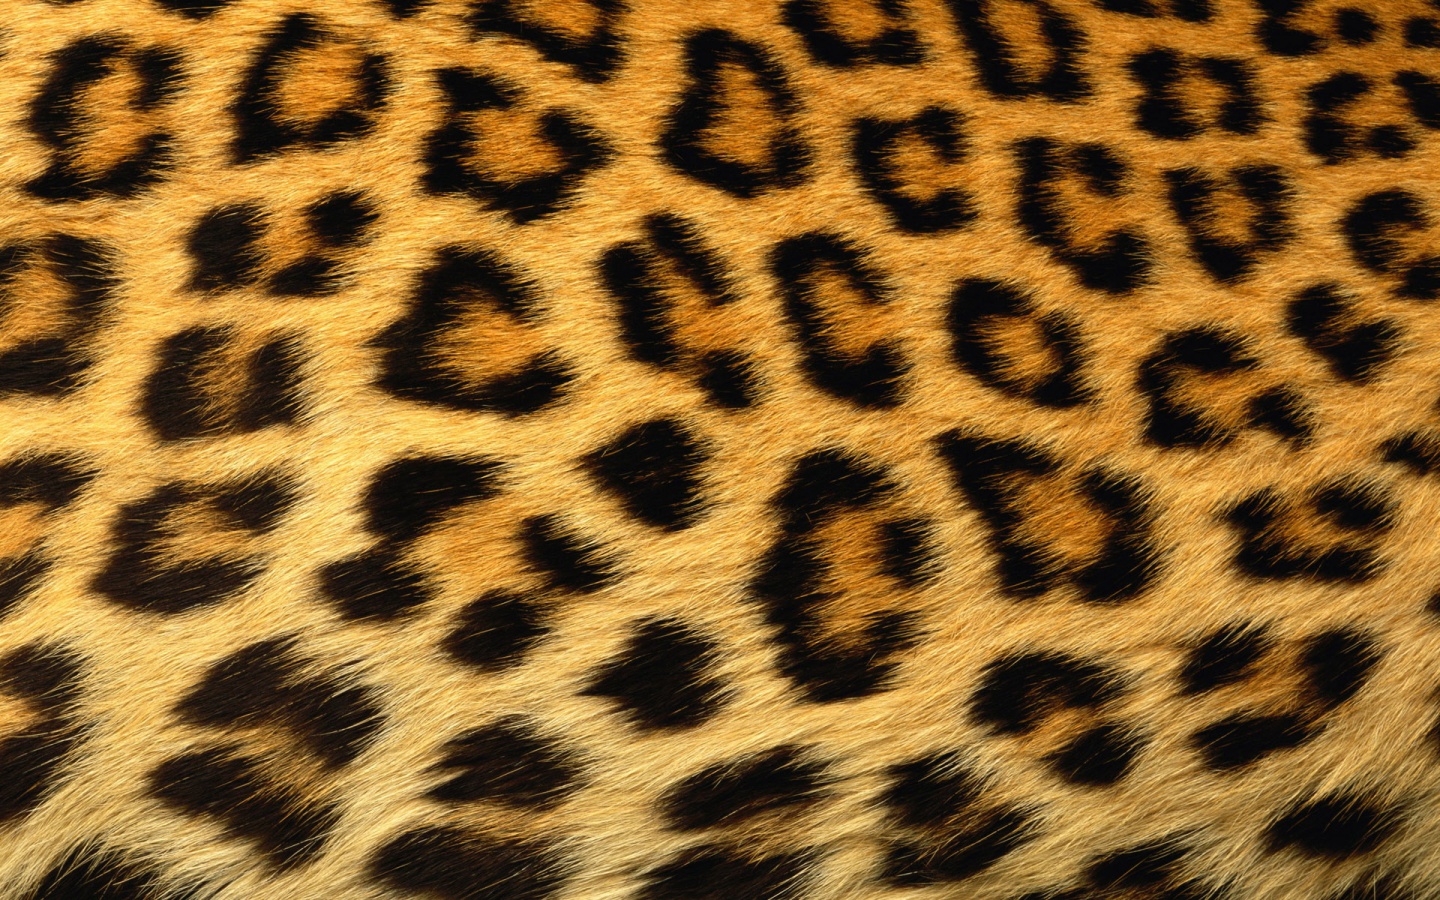 Leopard Spots Are Actually Clusters Of Black And Brown That Look